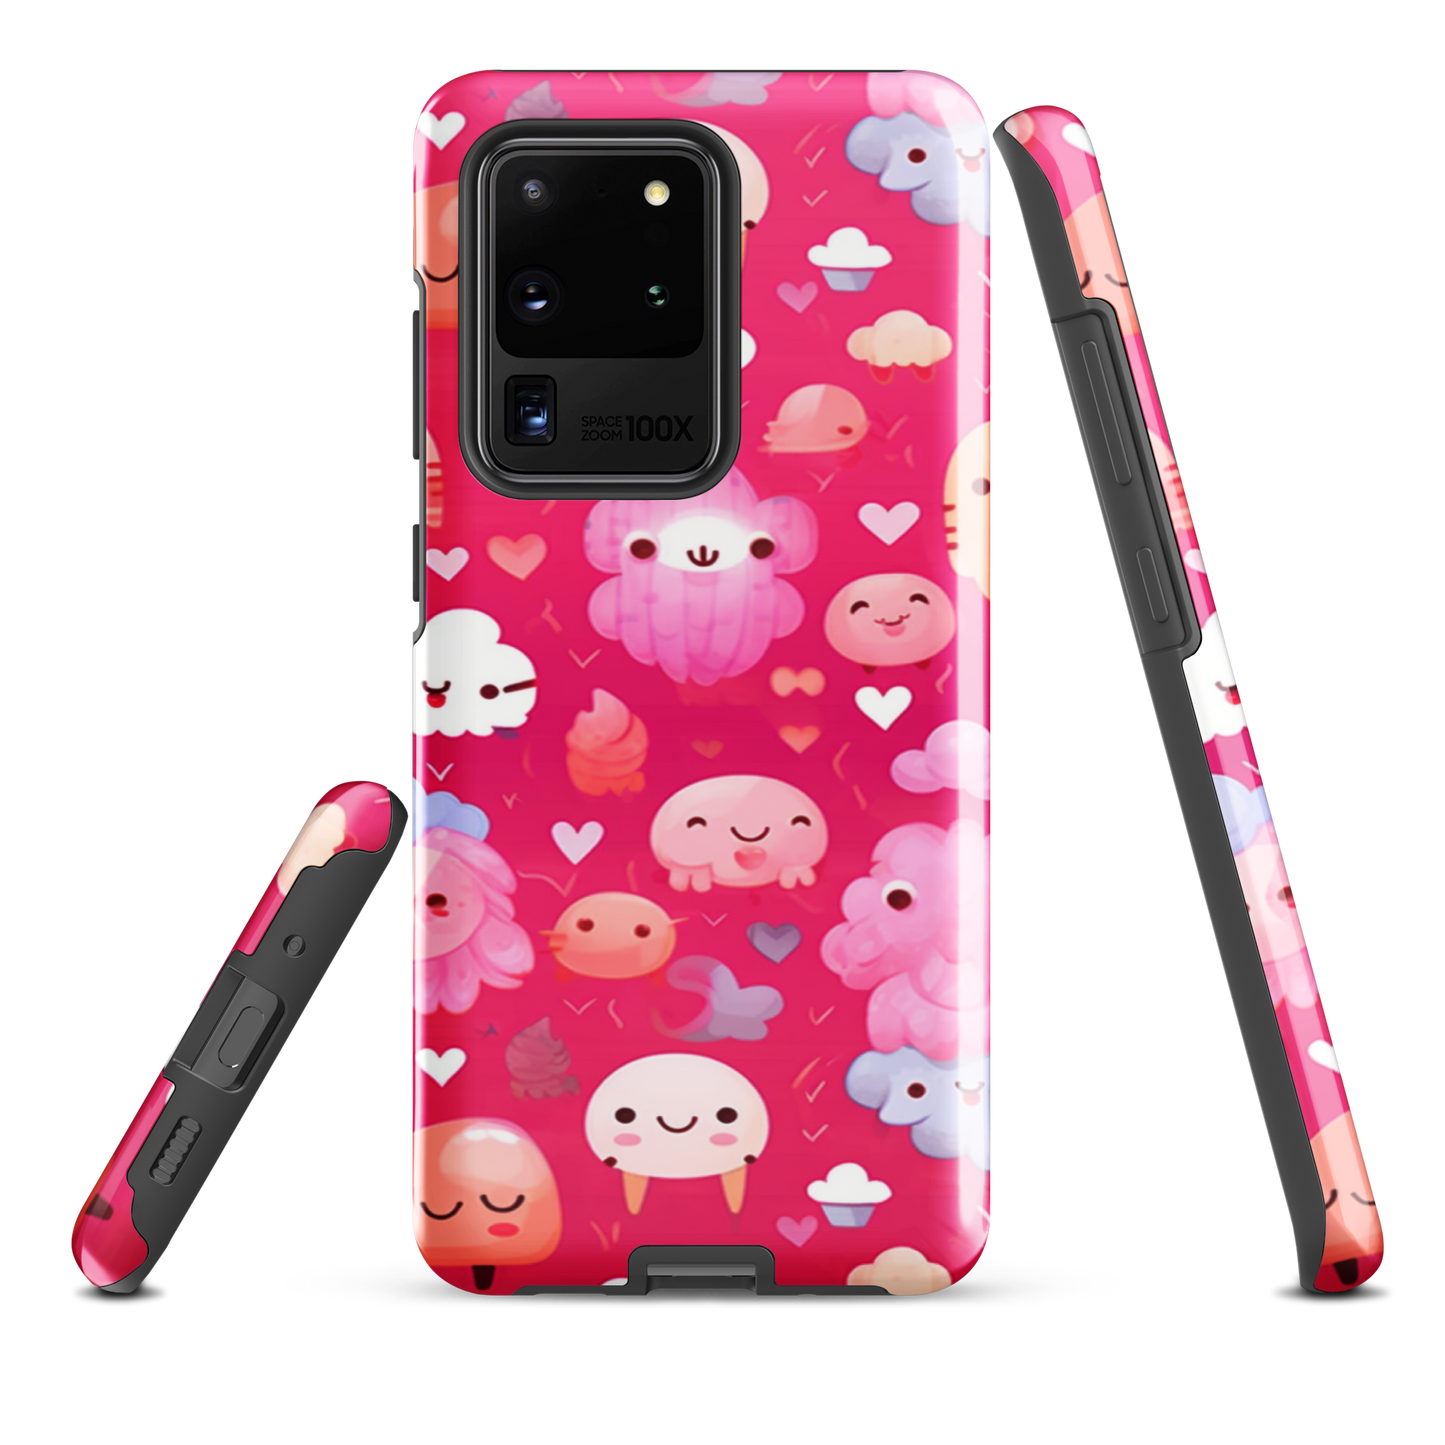 Pink and Fluffy Tough Case, Shockproof Phone Case,Cool Designed Phone Cases, Pocket-friendly